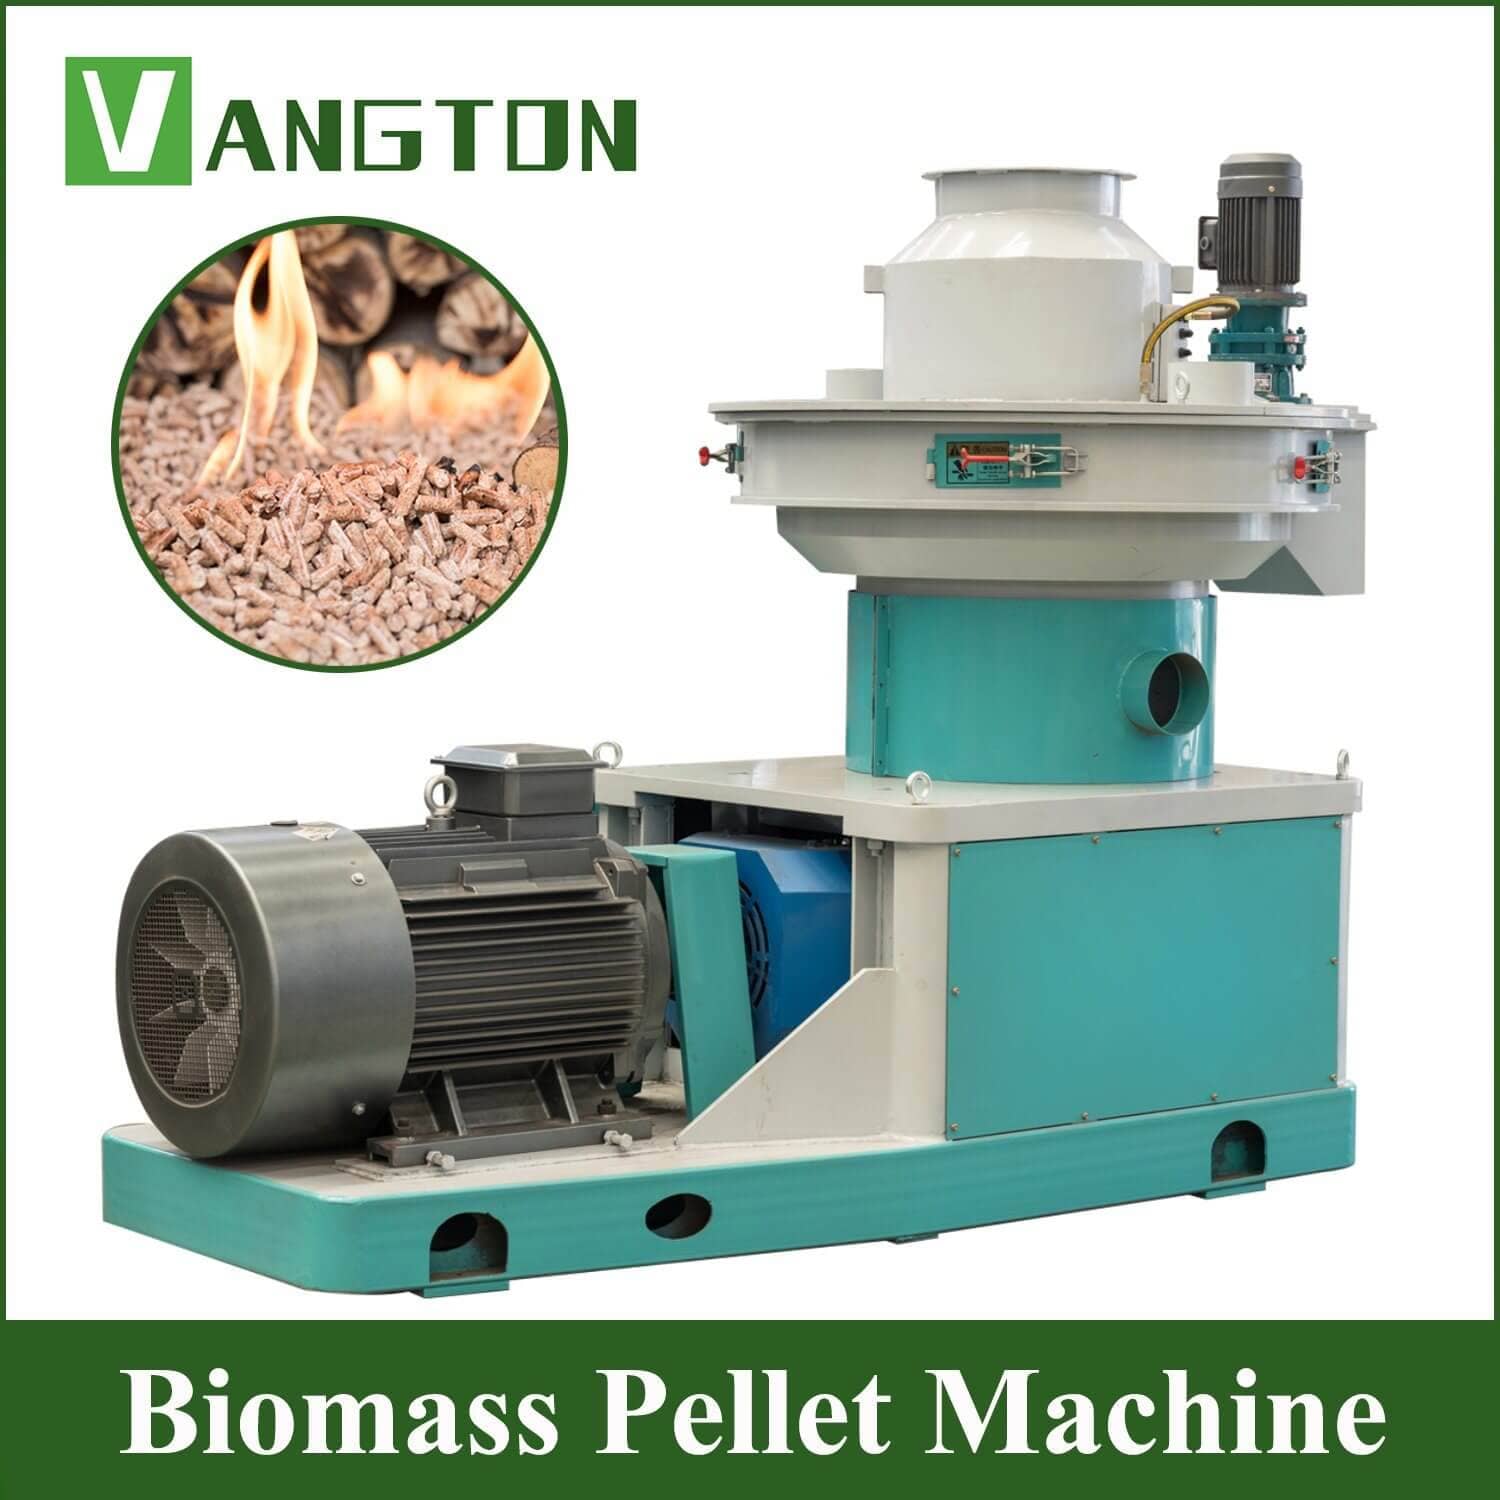 Small Wood Pellet Machine to Make Own Pellets